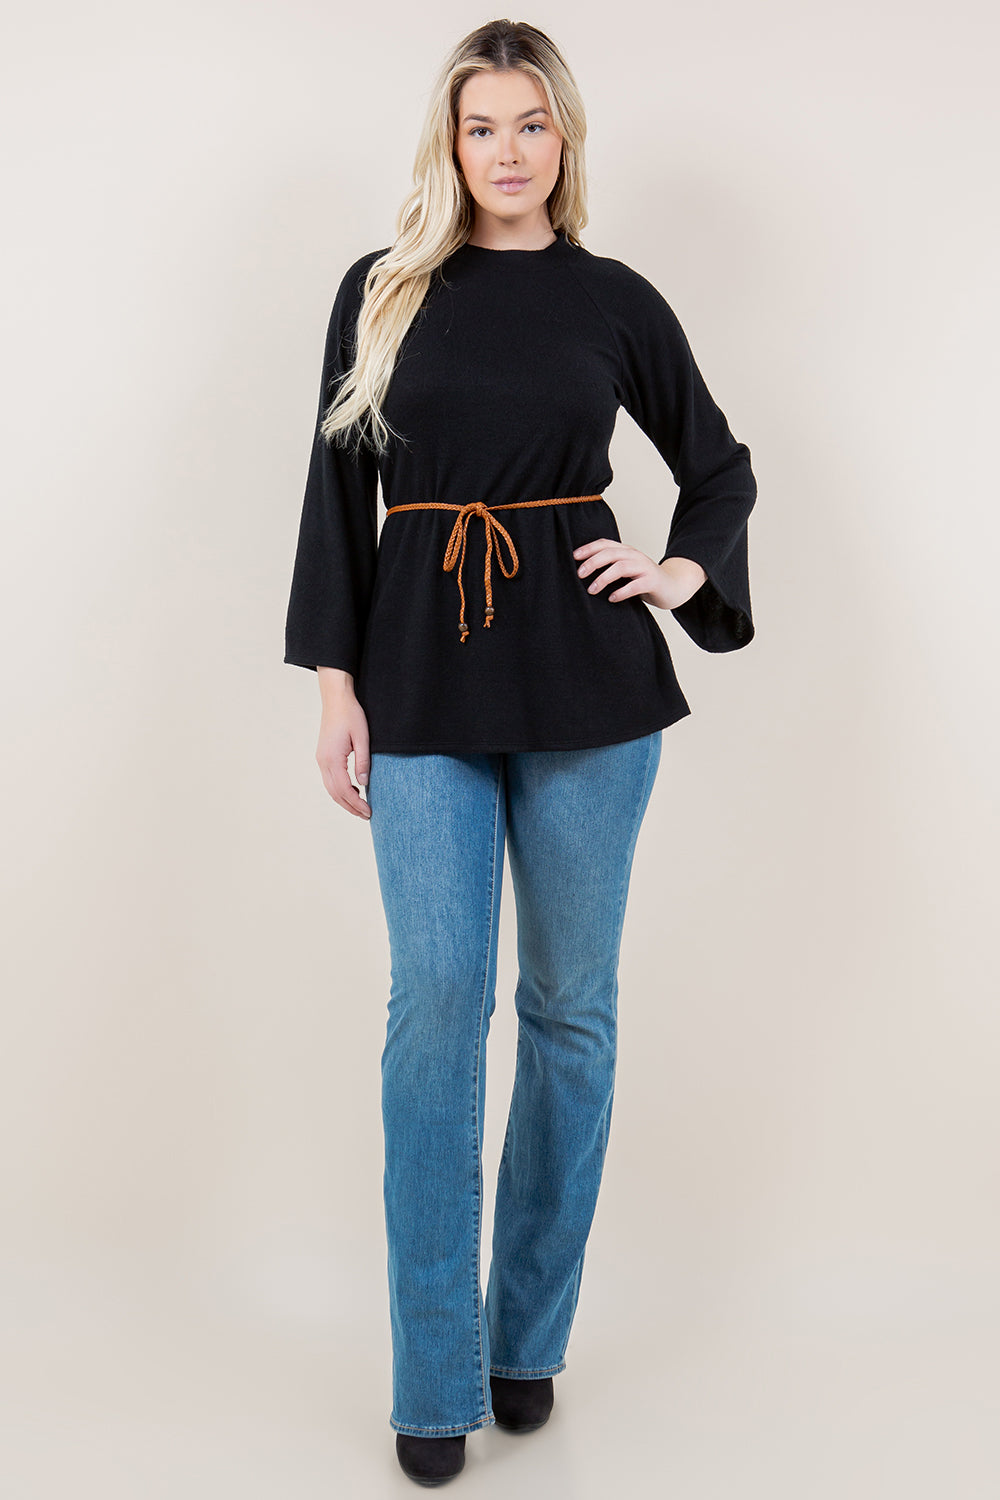 BELL LS RAGLAN MOCK NECK TUNIC WITH BRAIDED TIE - T11616-CSH-HACCI-BLK